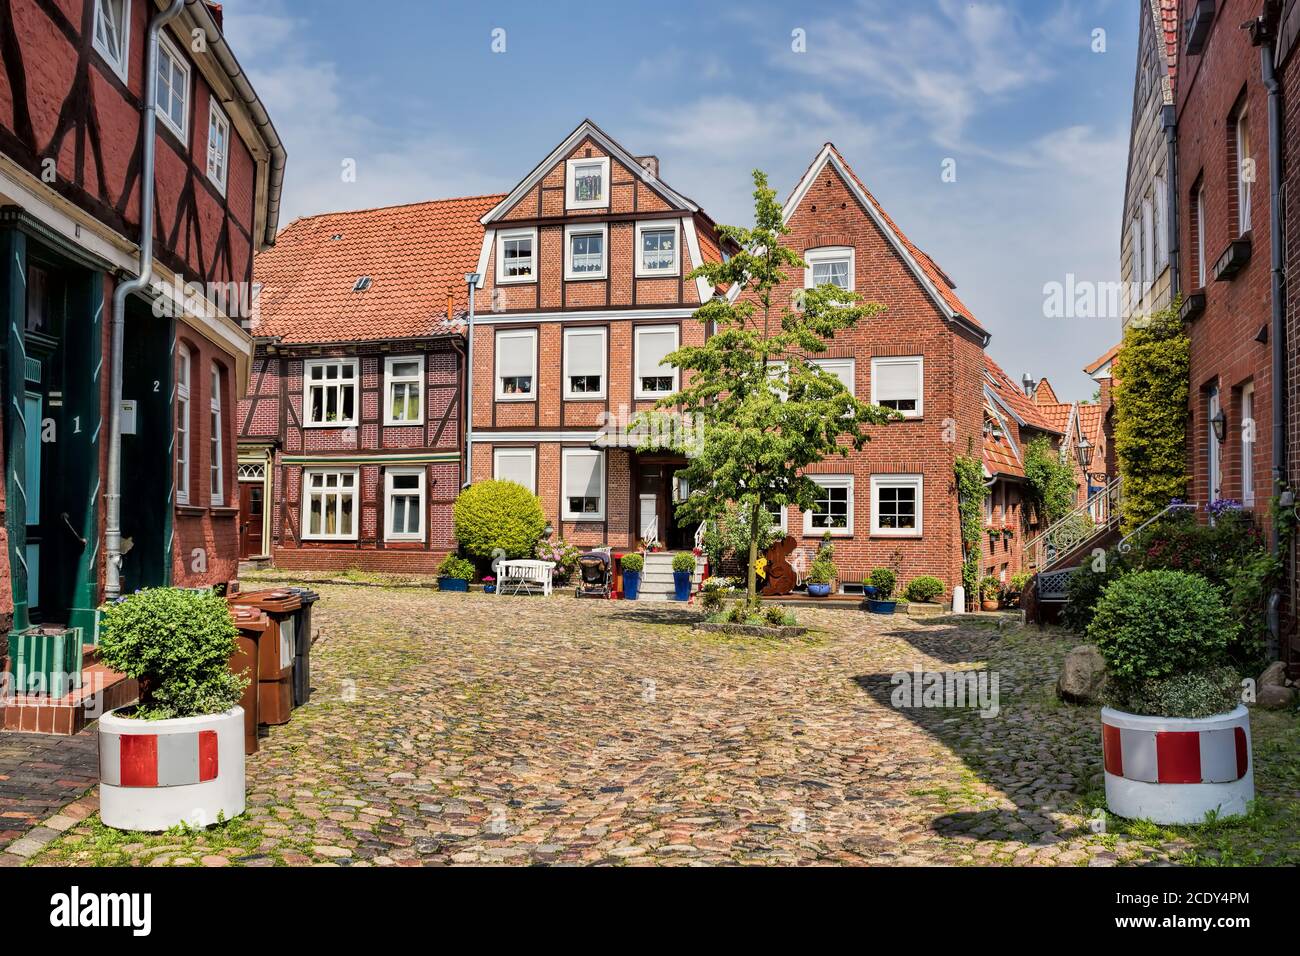 Old town of Stade in Germany Stock Photo